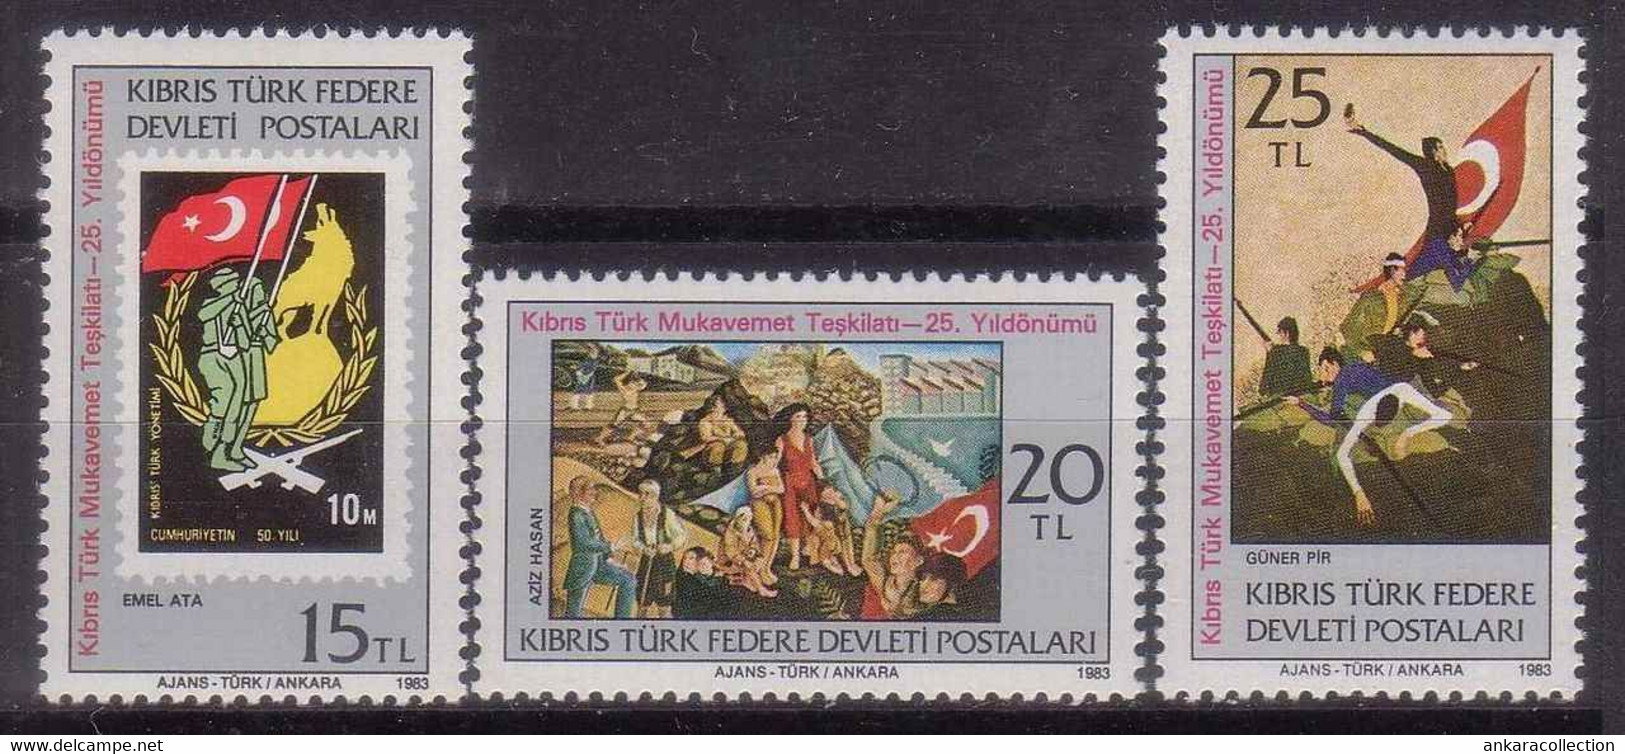 AC - NORTHERN CYPRUS STAMP -  ANNIVERSARIES AND EVENTS MNH 01 AUGUST 1983 - Unused Stamps